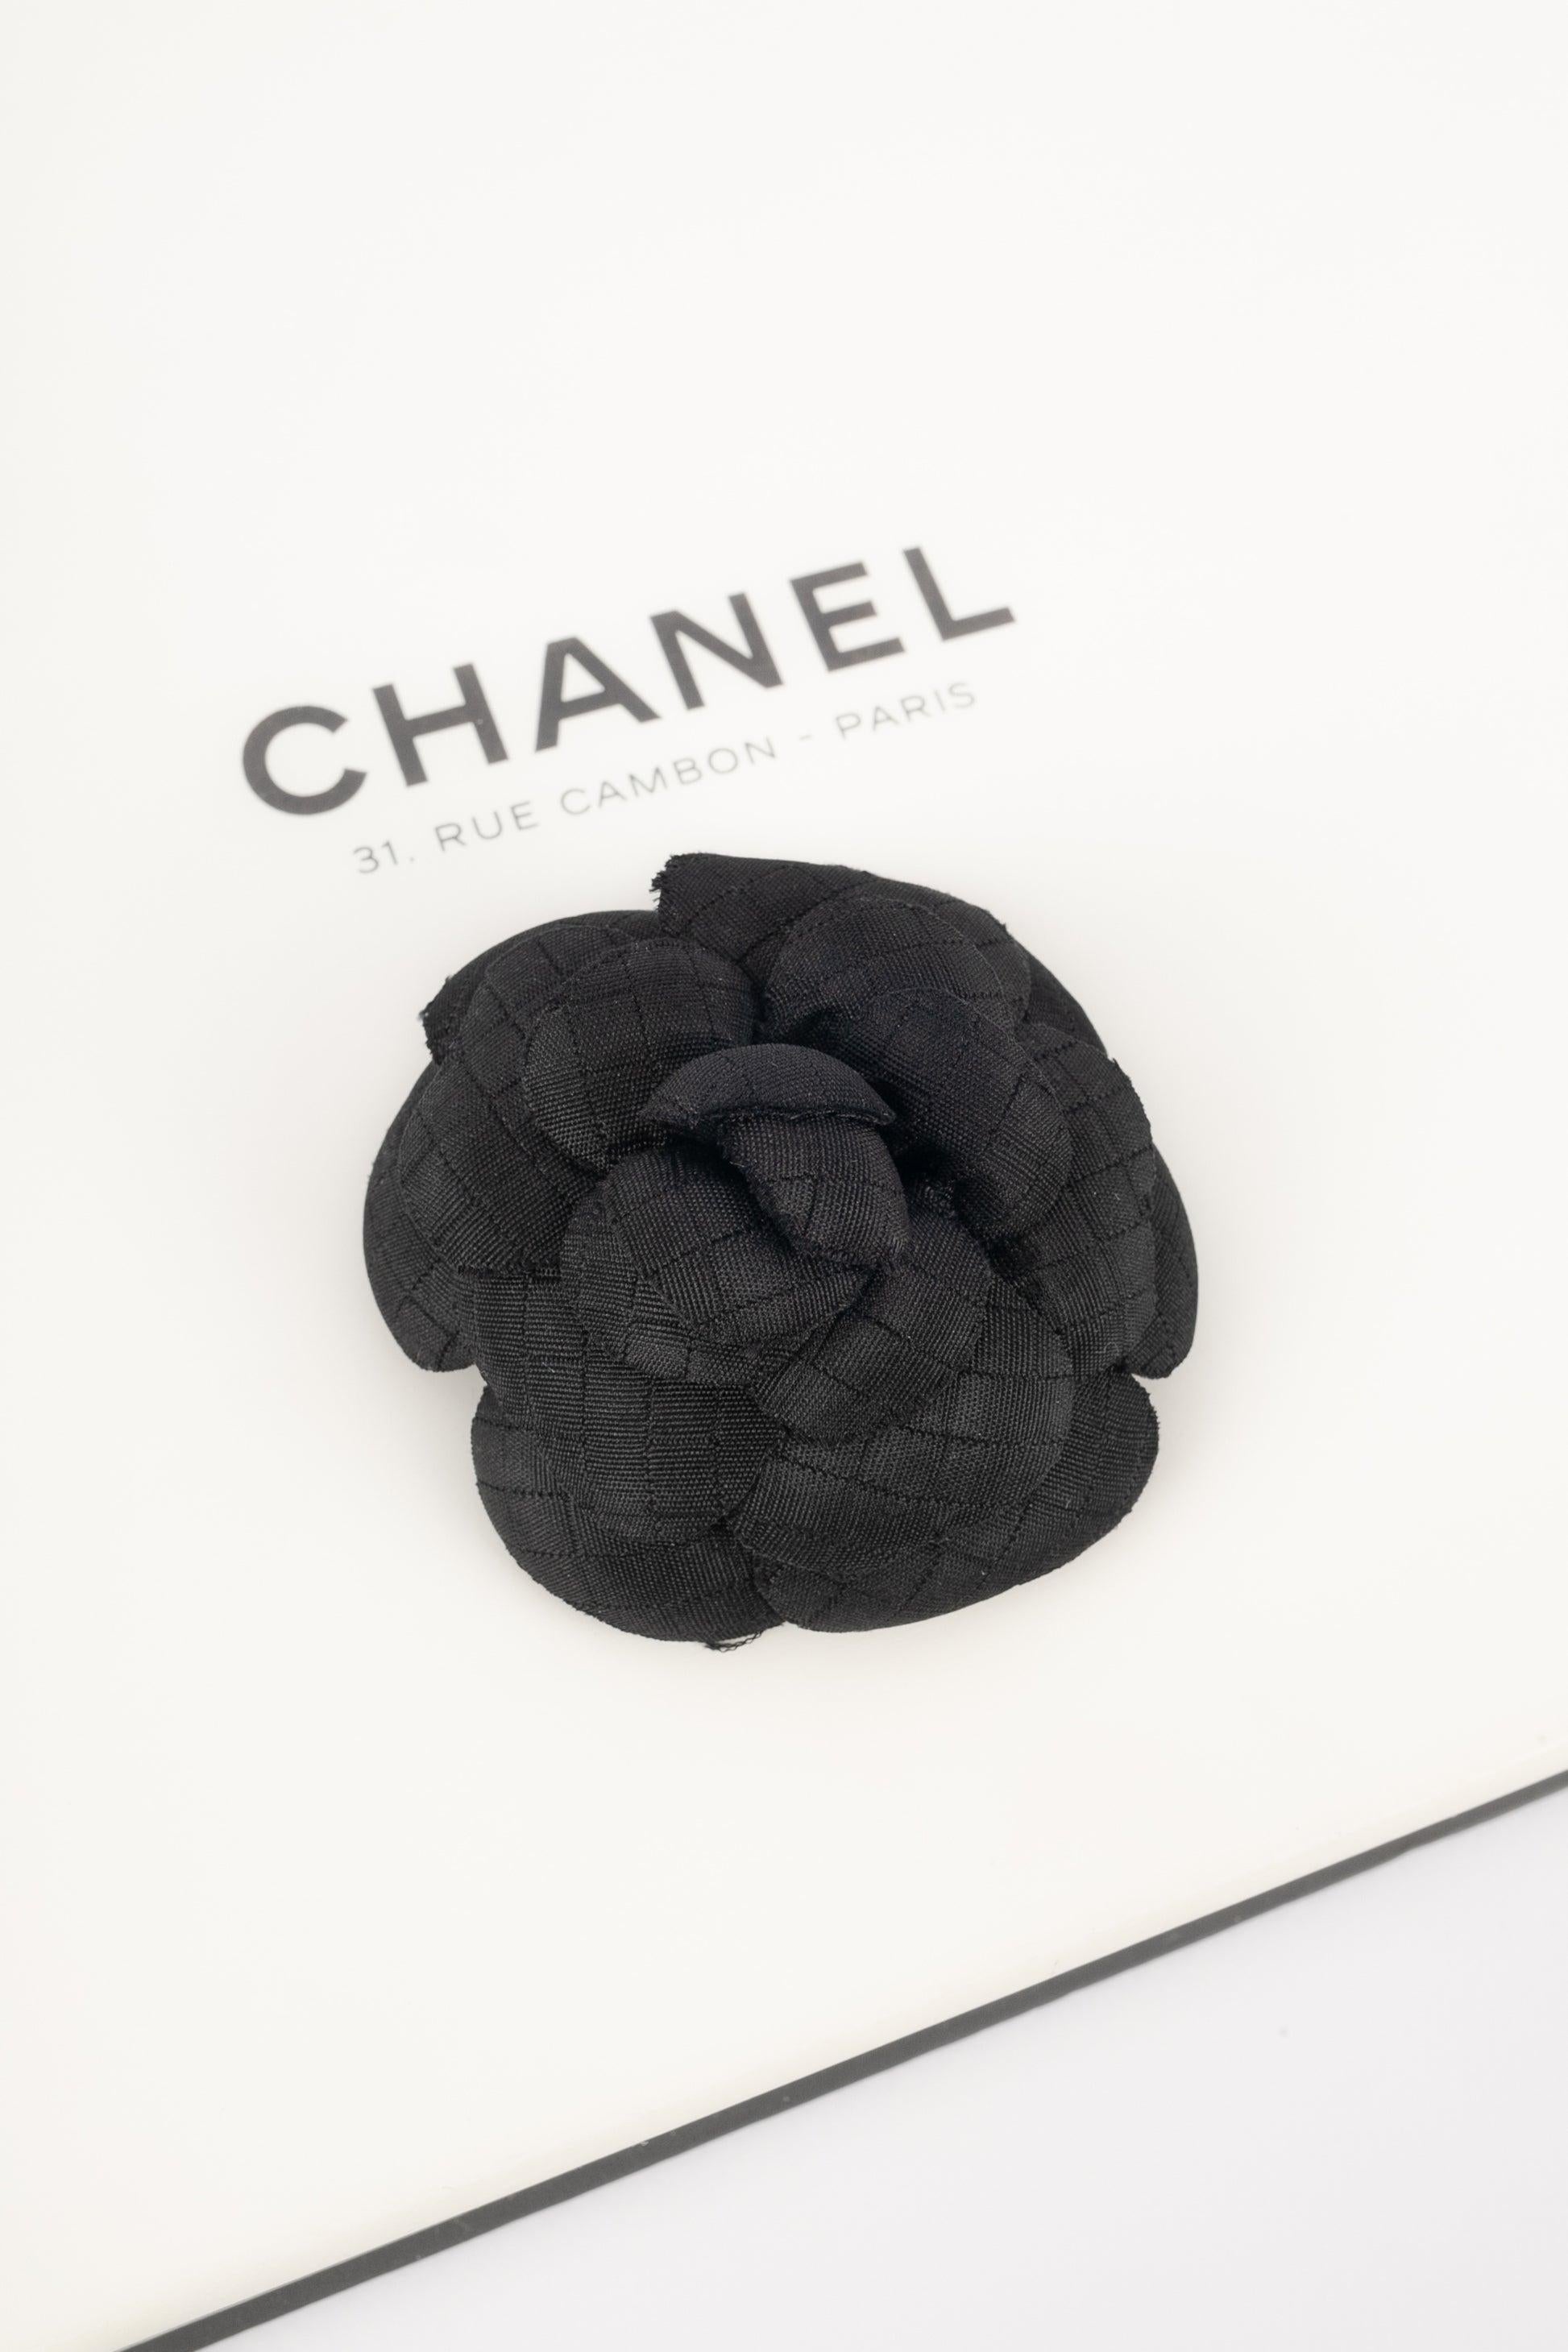 Chanel Black Woven Fabric Camellia Brooch For Sale 2